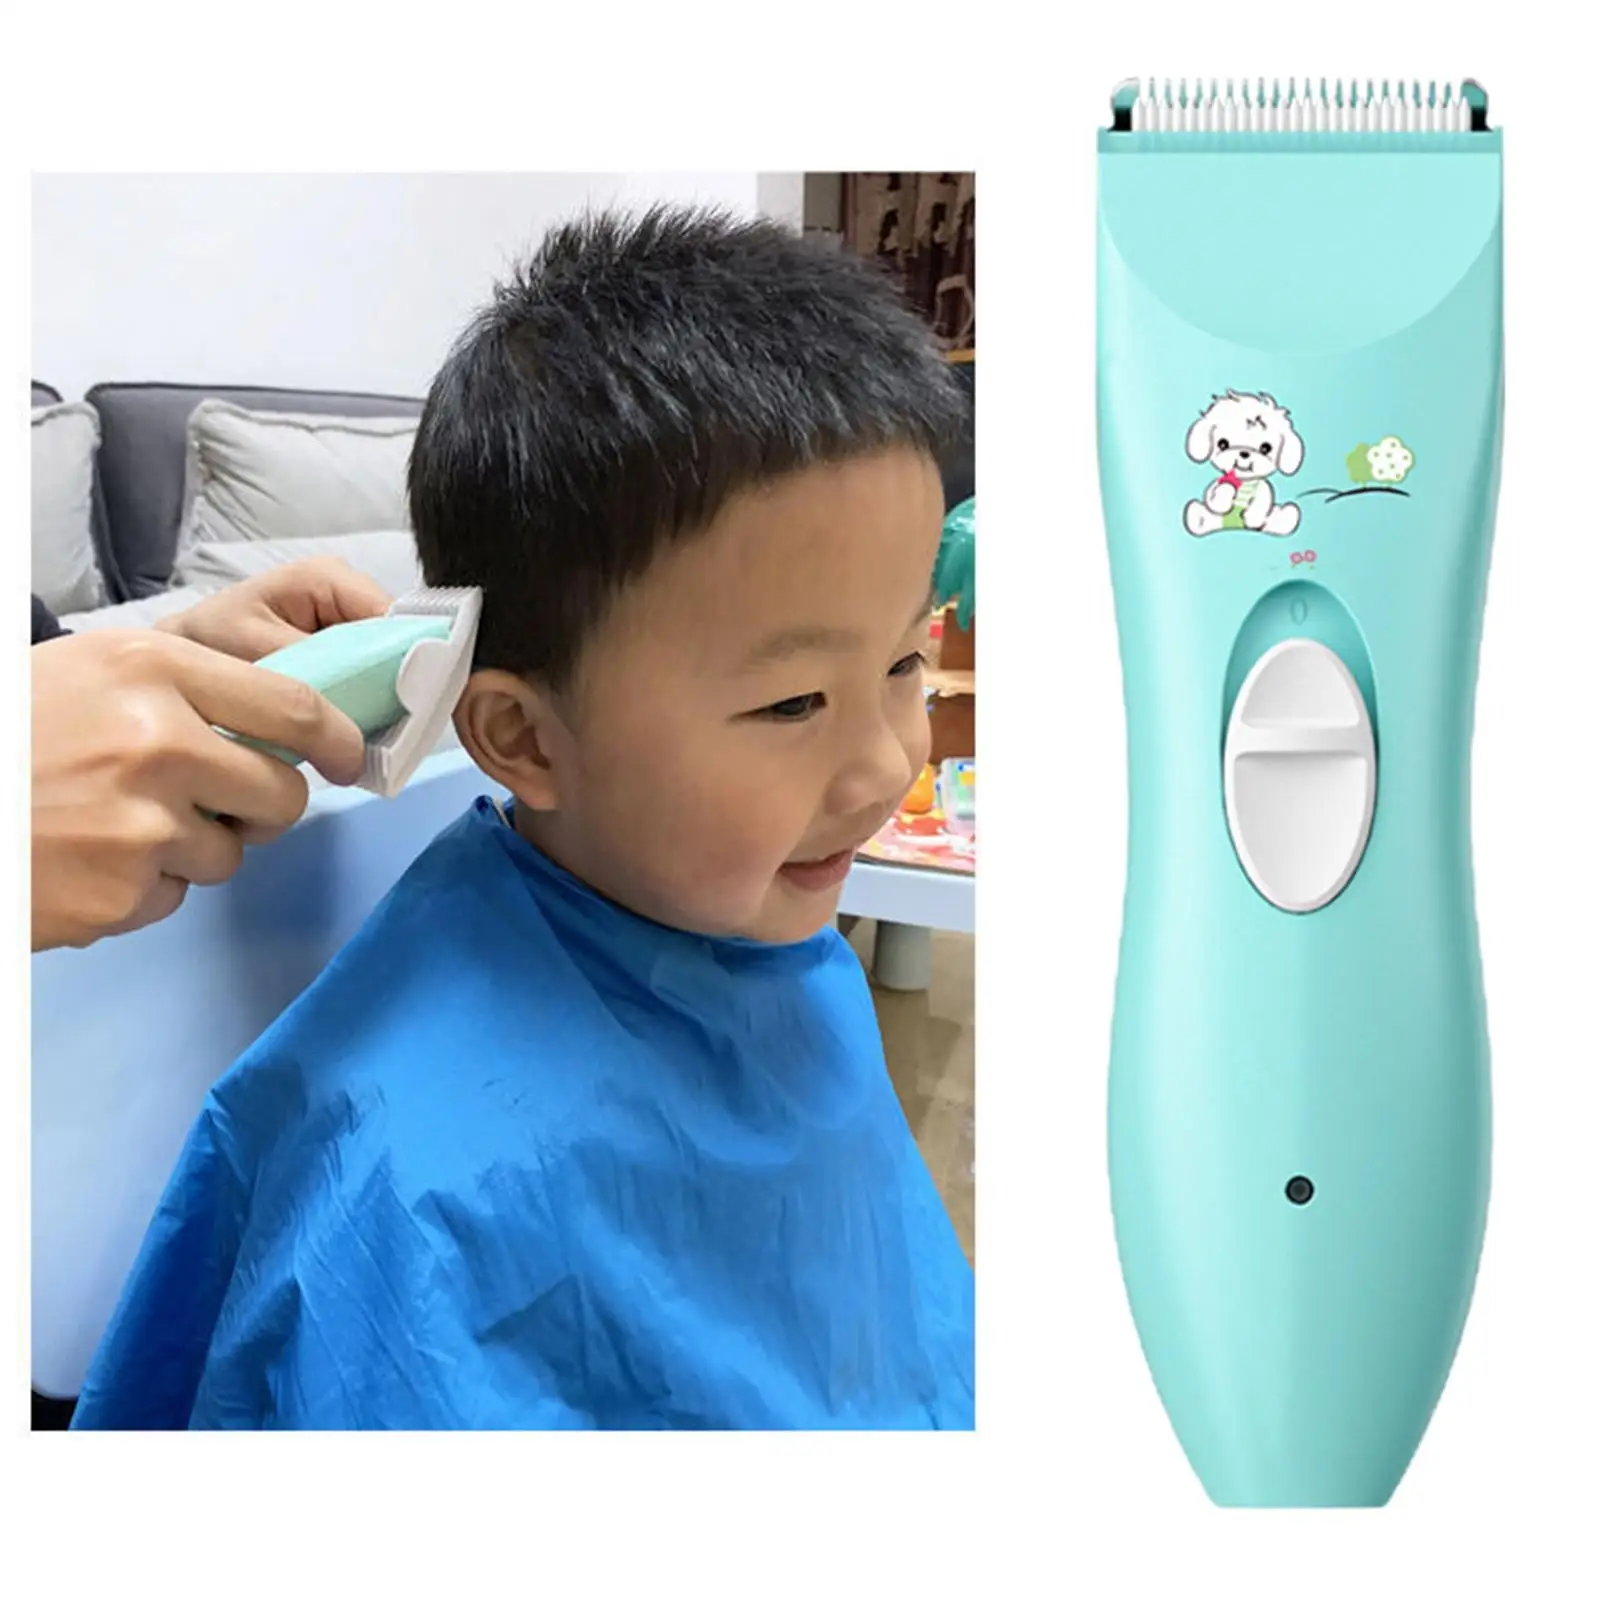 Cordless Electric Hair Clippers for Kids USB Charging R Round Cutting Unit